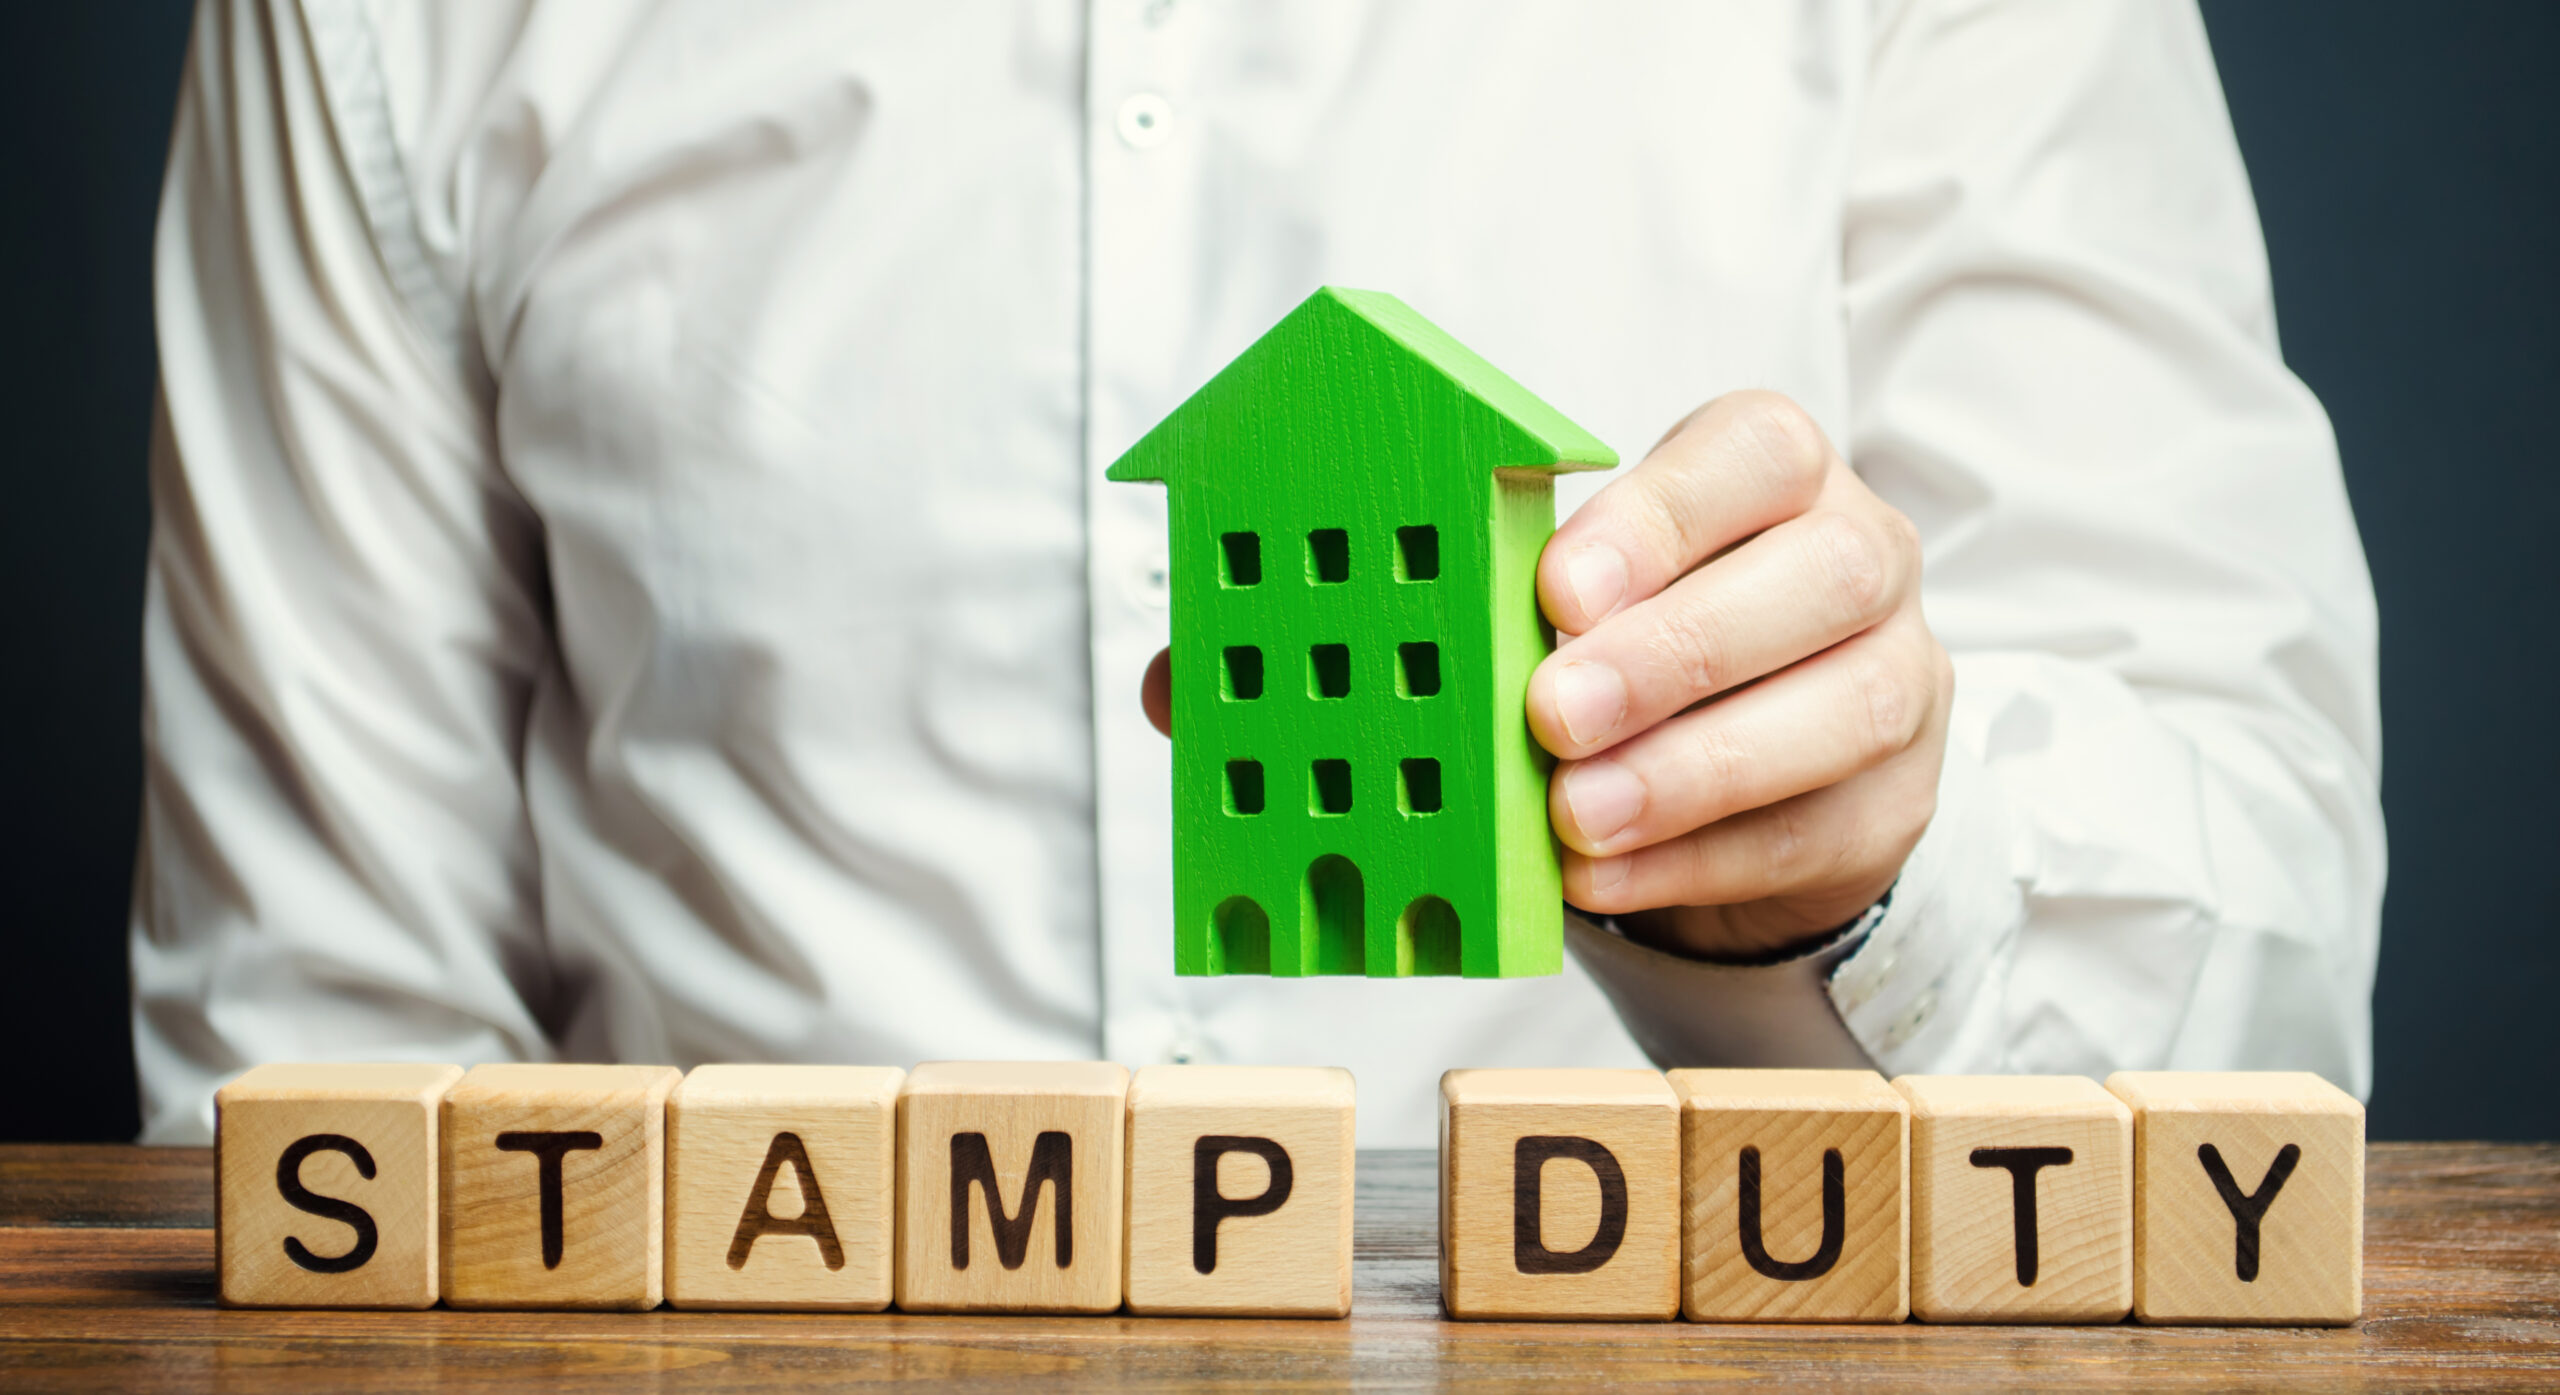 Do I need to pay stamp duty when selling my property?